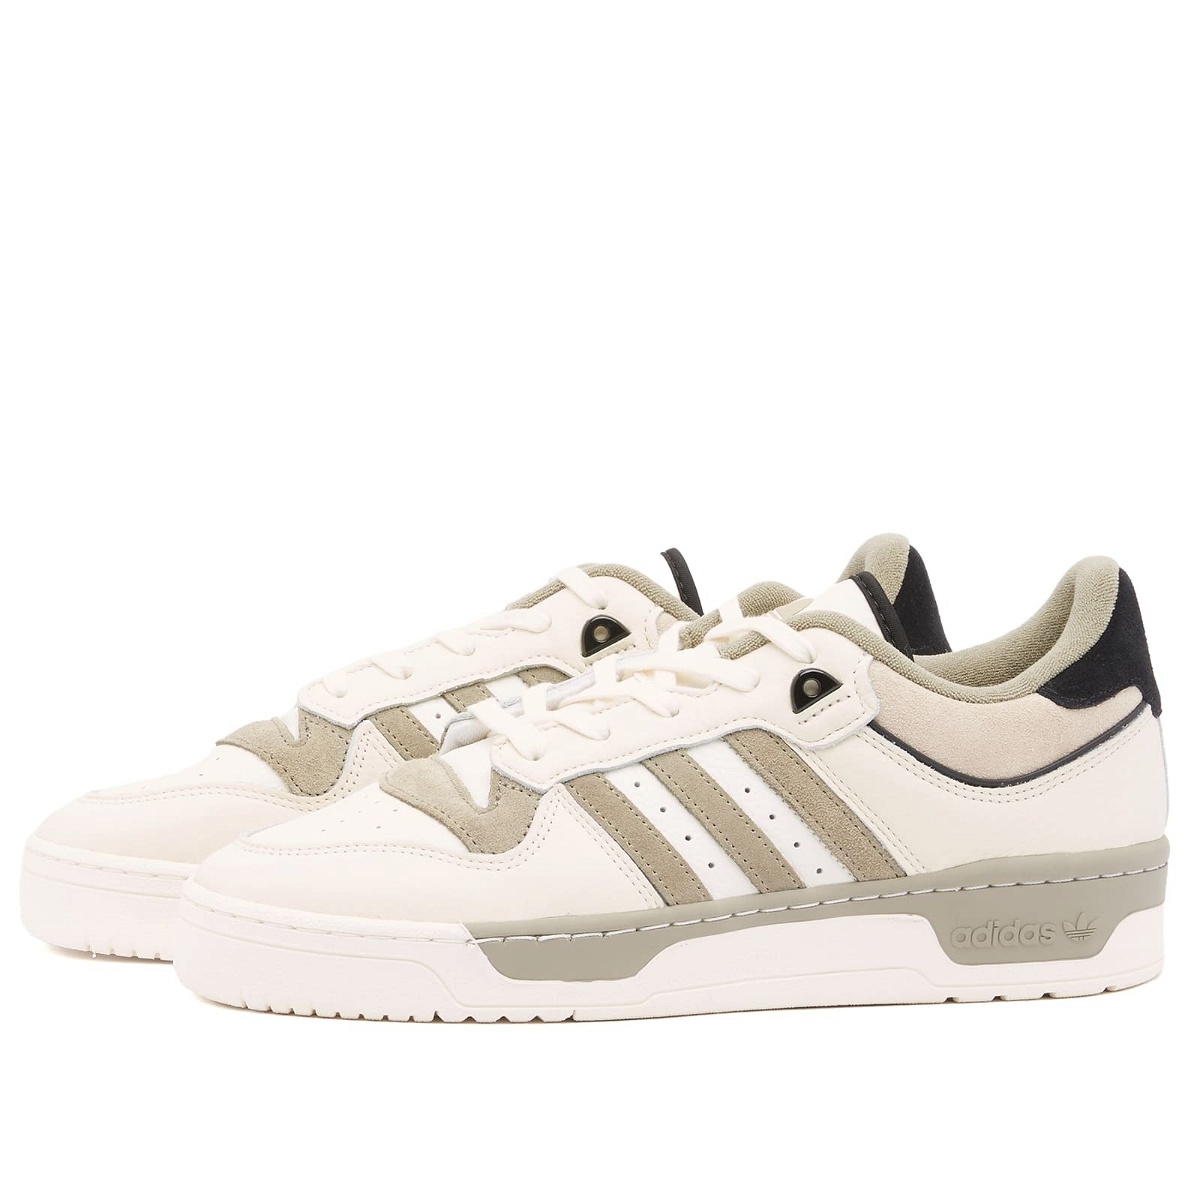 Photo: Adidas Men's Rivalry 86 Low Sneakers in Off White/Core Black